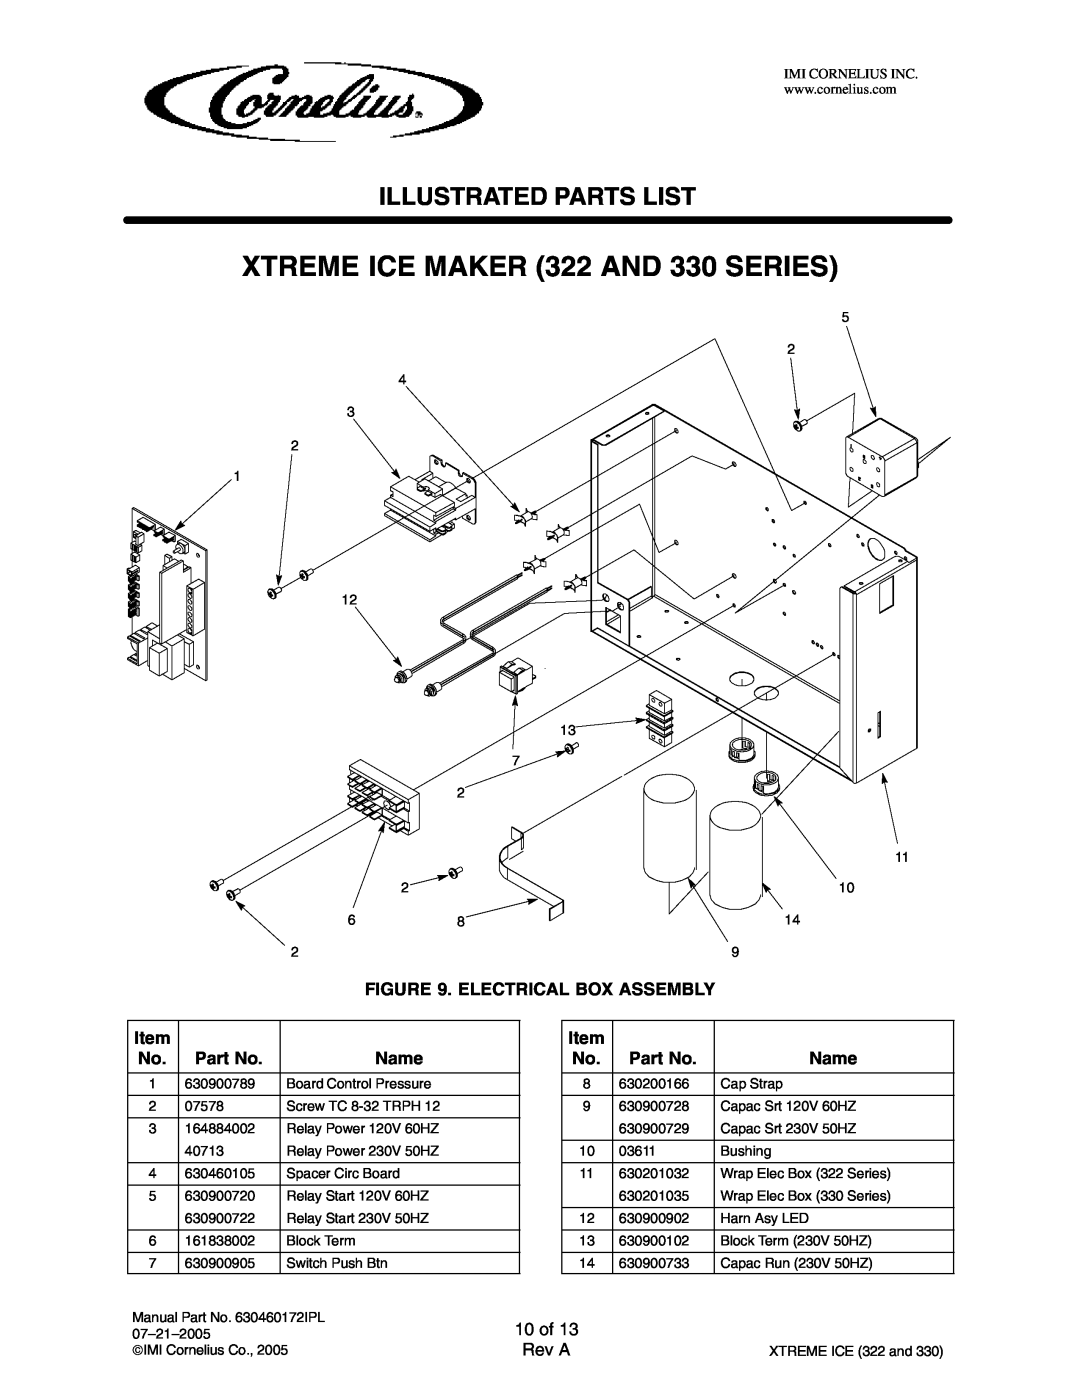 Cornelius 631803020 manual 10 of, XTREME ICE MAKER 322 AND 330 SERIES, Illustrated Parts List, Rev A, 630200166, Cap Strap 